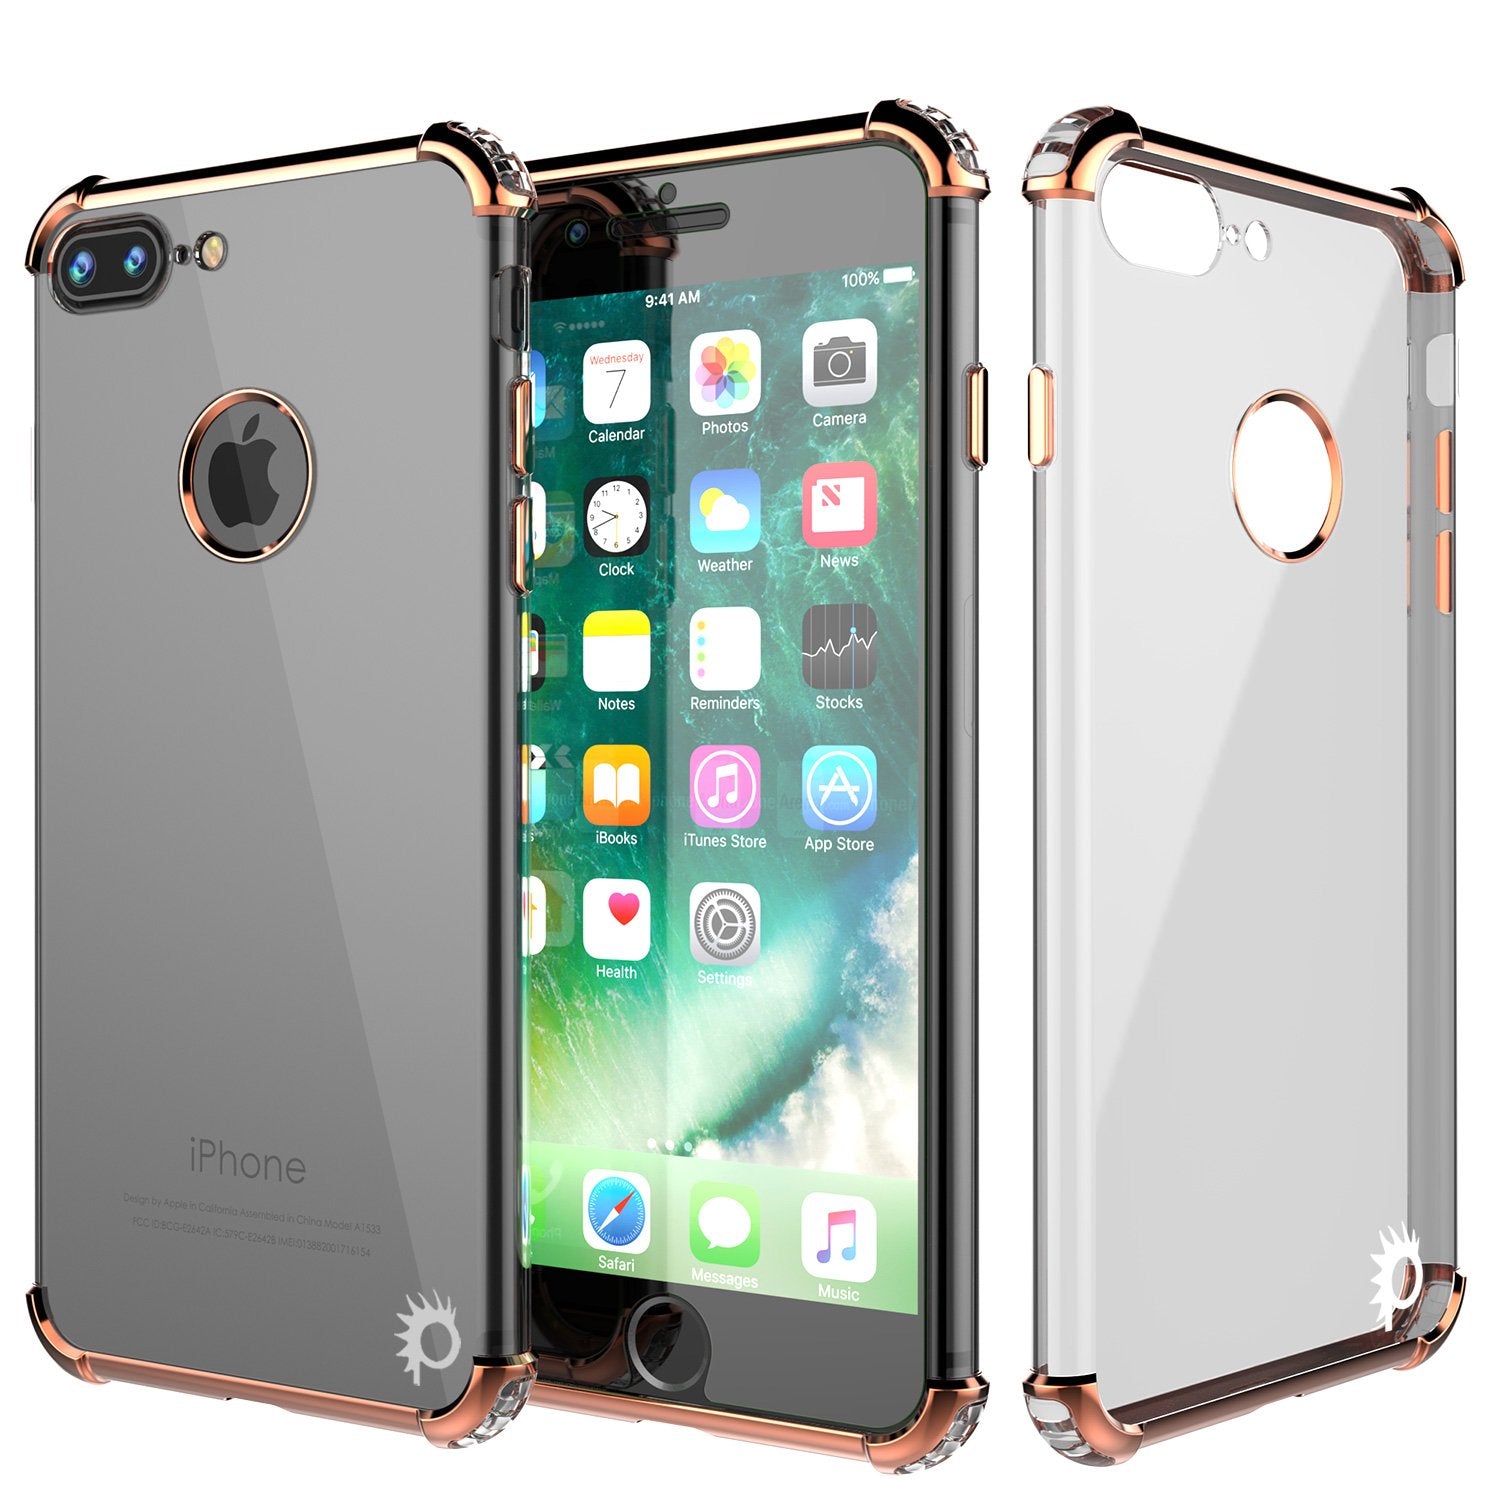 iPhone 7 PLUS Case, Punkcase [BLAZE SERIES] Protective Cover W/ PunkShield Screen Protector [Shockproof] [Slim Fit] for Apple iPhone 7/8/6/6s PLUS [Gold] - PunkCase NZ